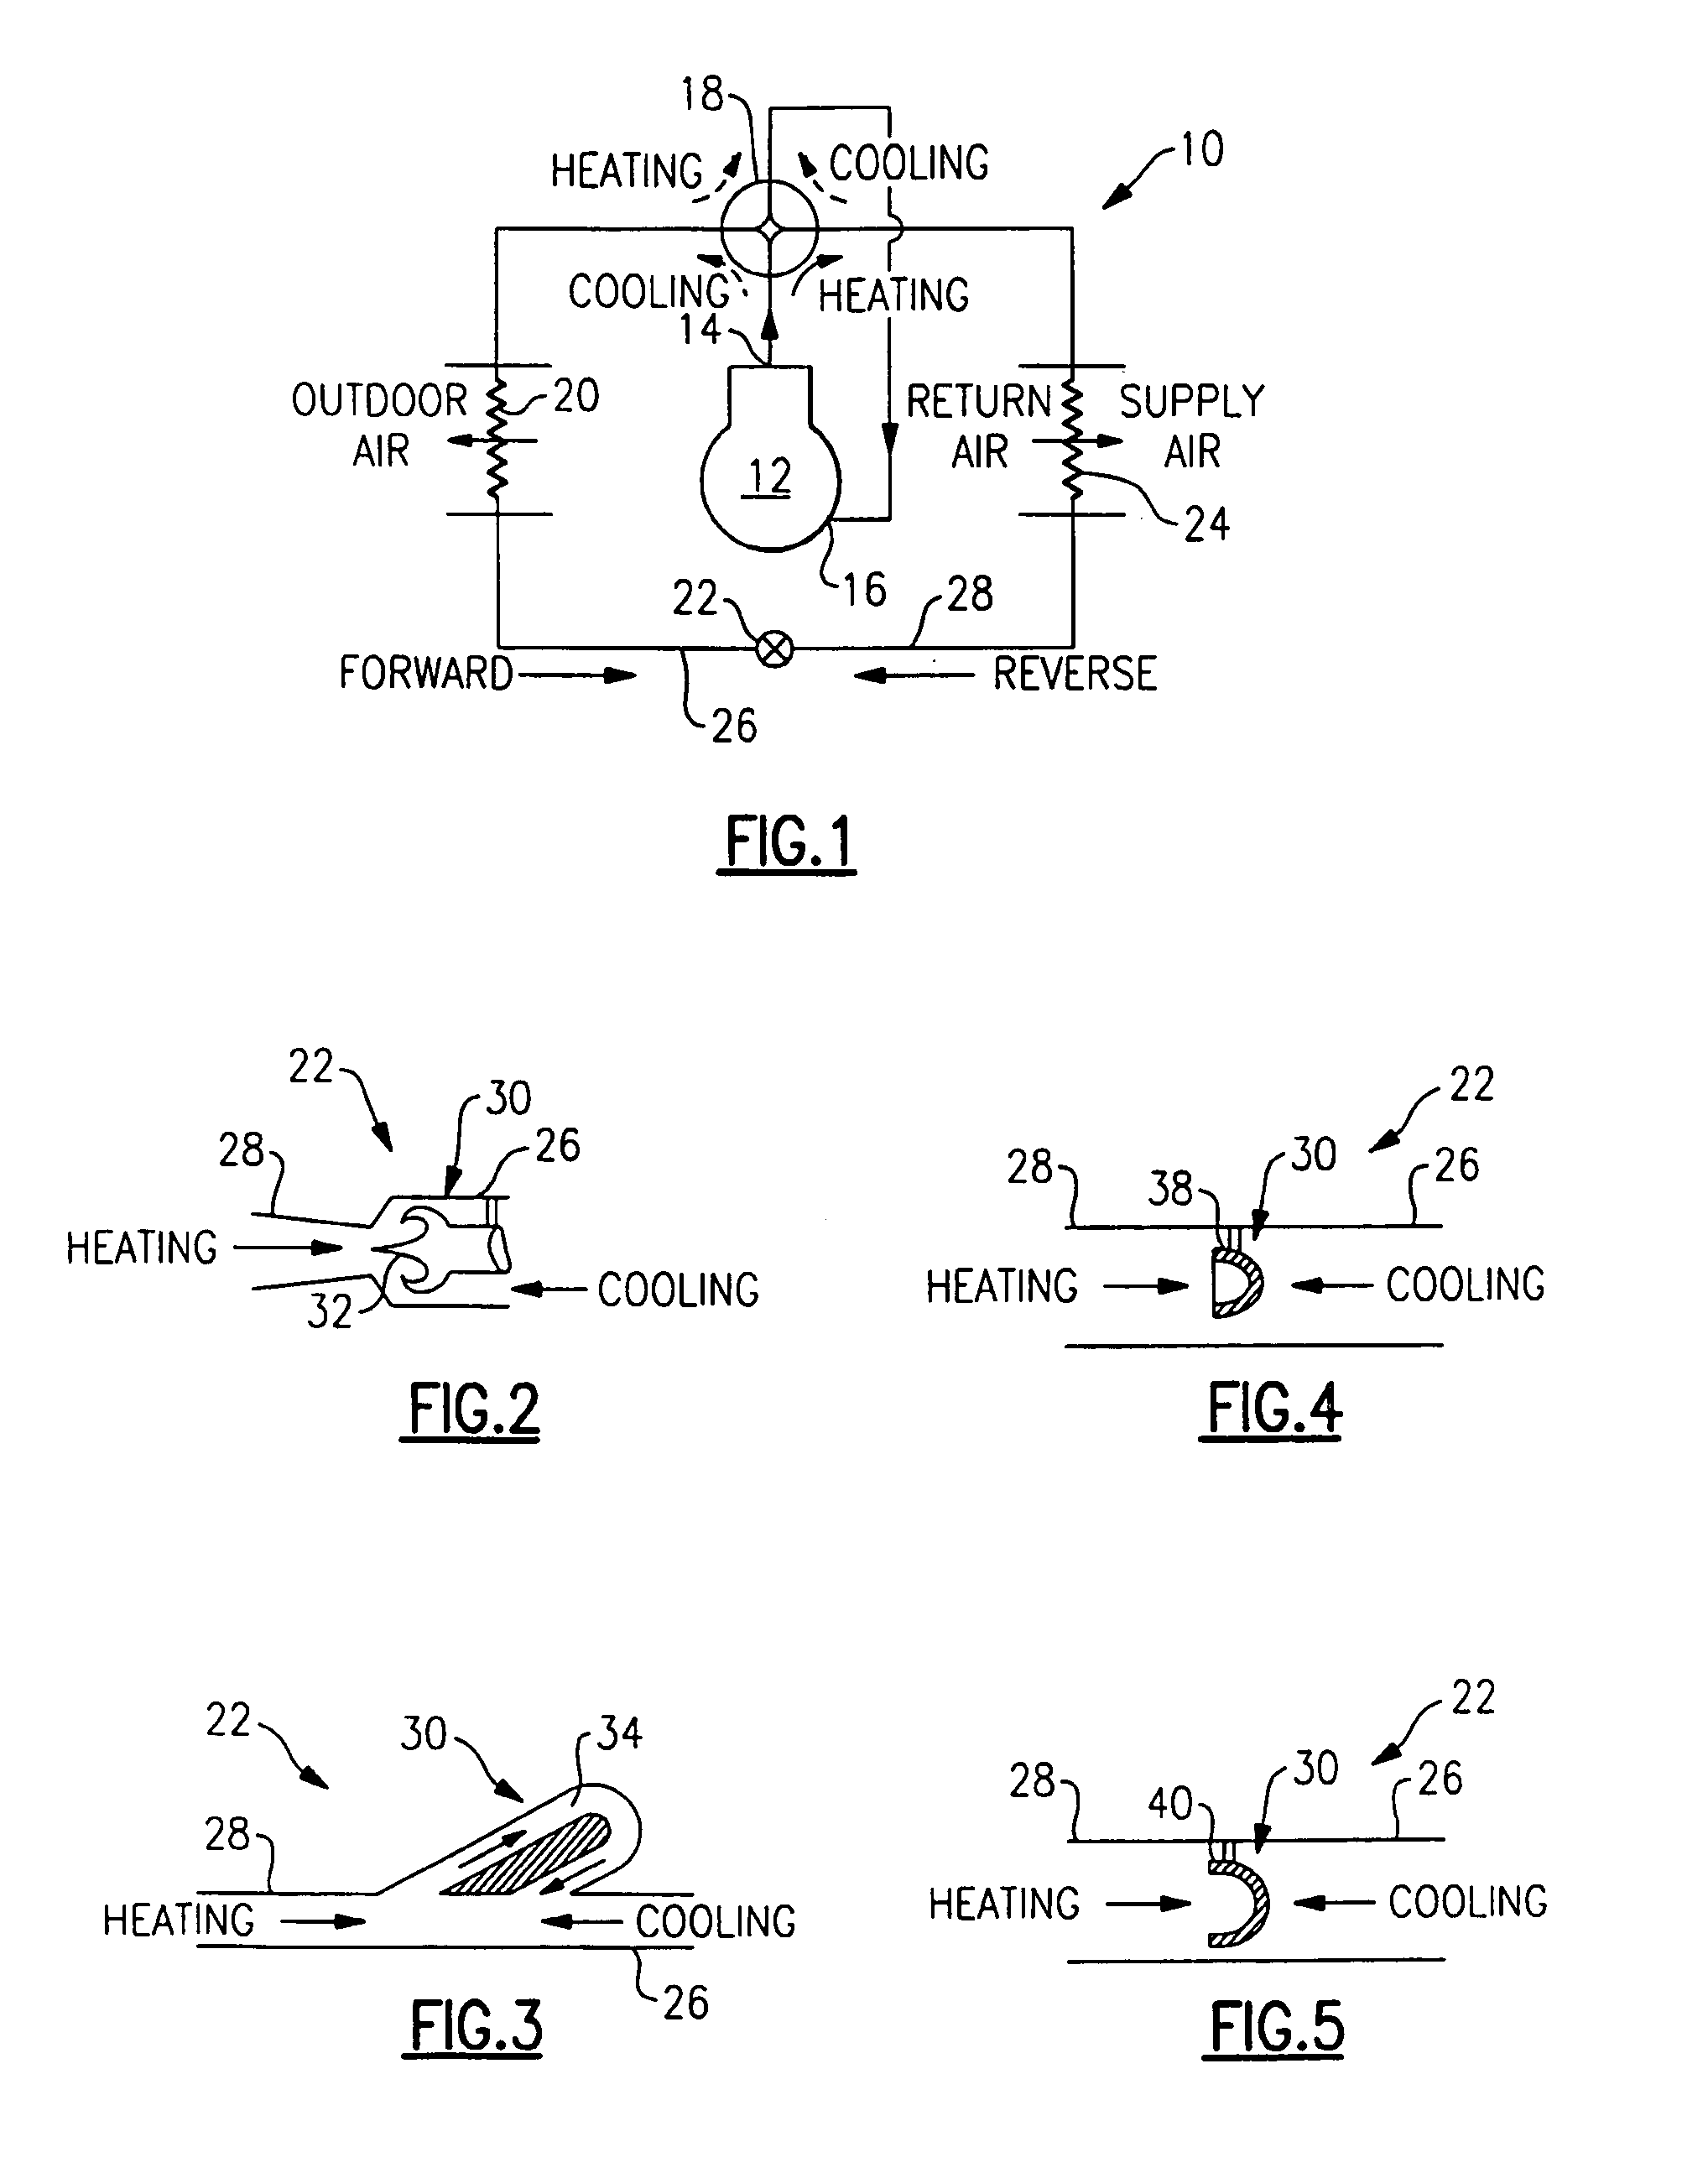 Fluid diode expansion device for heat pumps